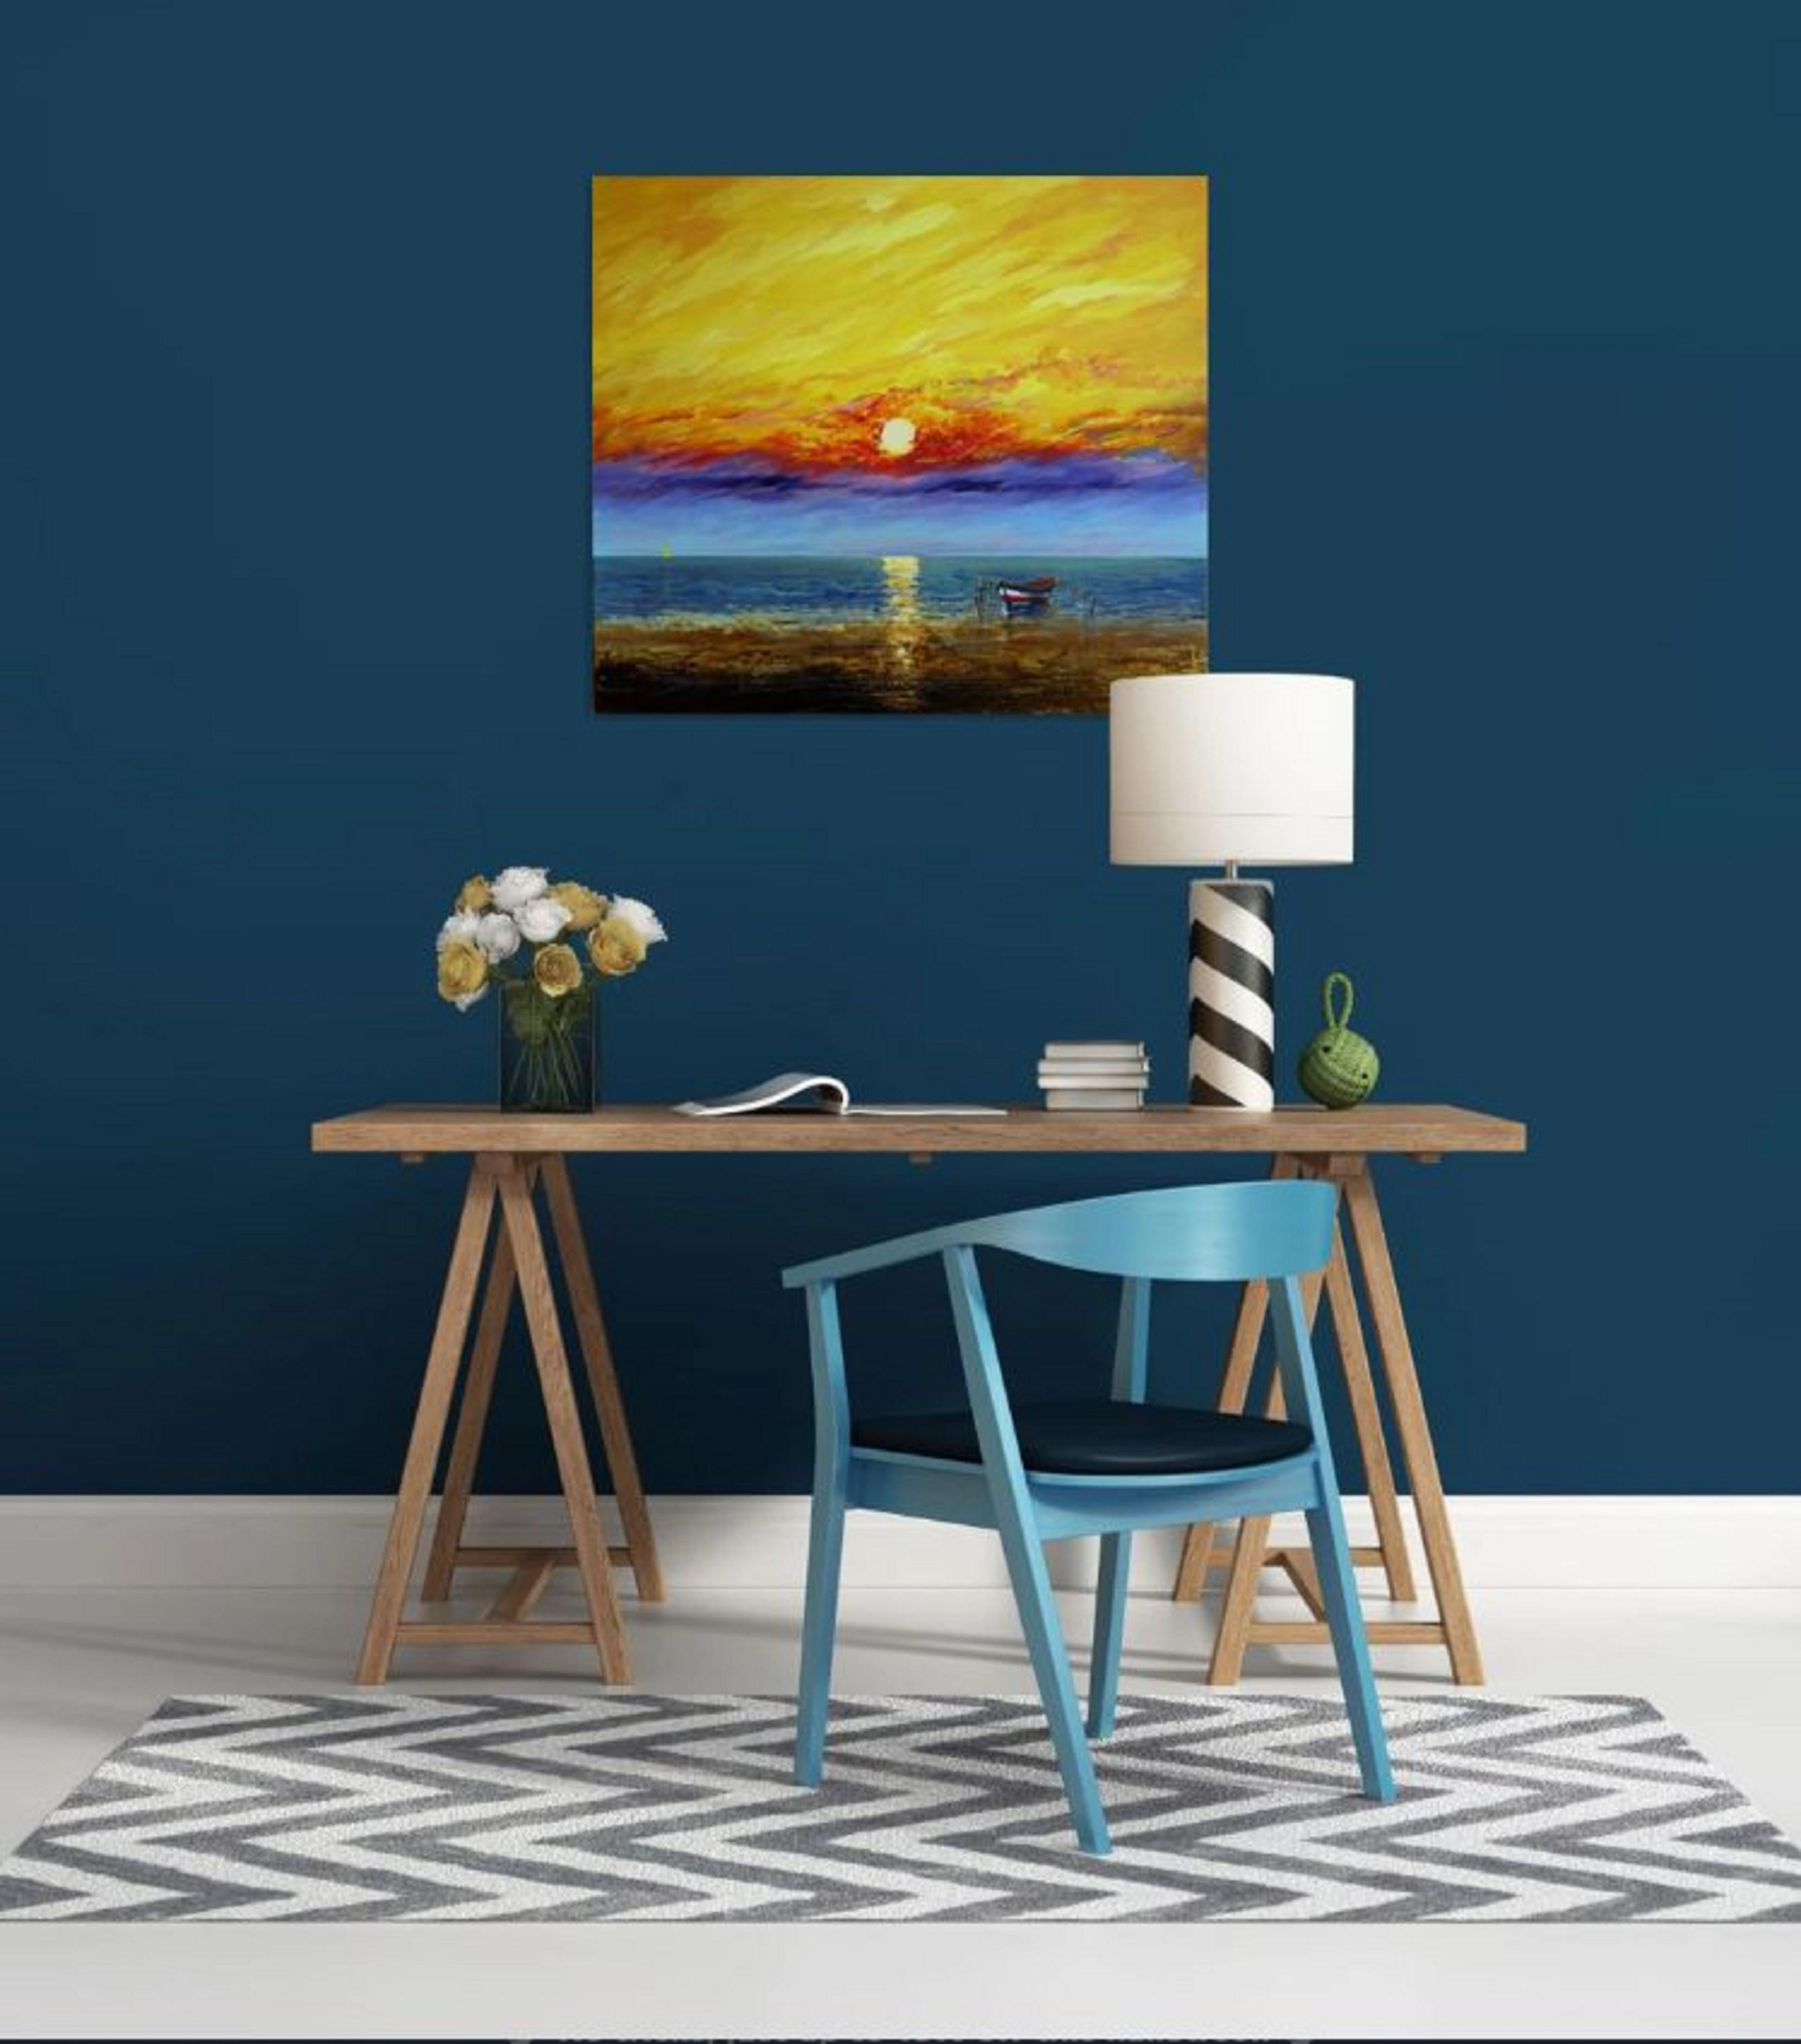 In this vibrant blend of acrylic and oil, I've woven raw emotion and the whispers of the sea into each stroke. The horizon melts into a symphony of fiery hues, reflecting the passionate embrace of sunset and ocean. It's a visual serenade, inviting